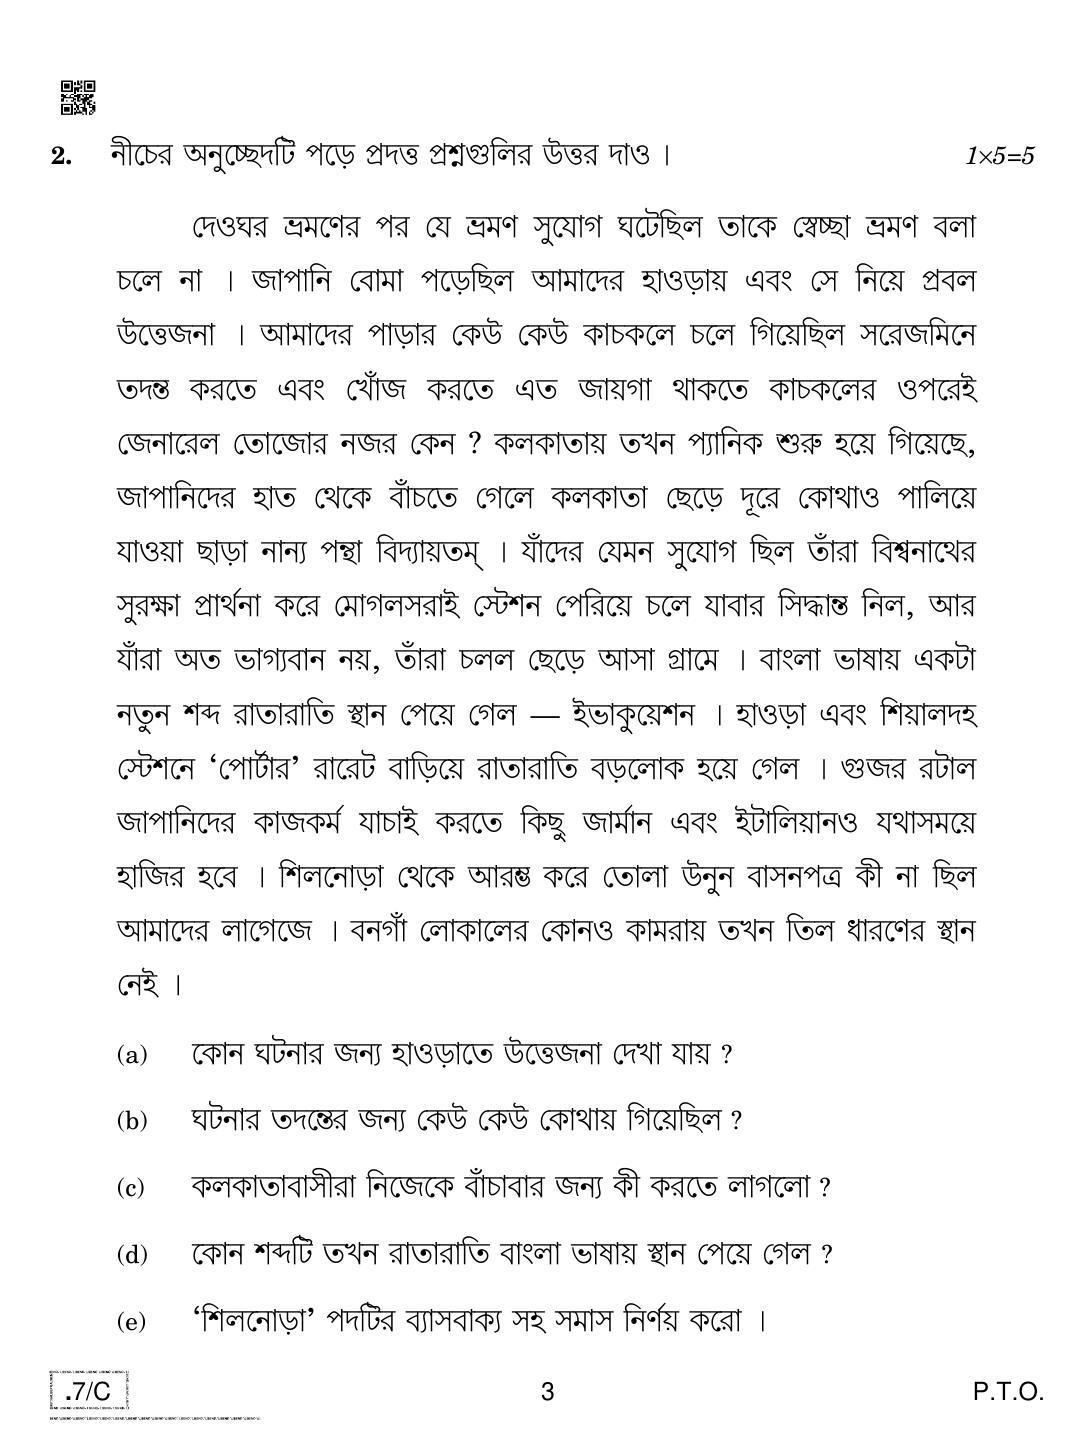 CBSE Class 10 Bengali 2020 Compartment Question Paper - Page 3